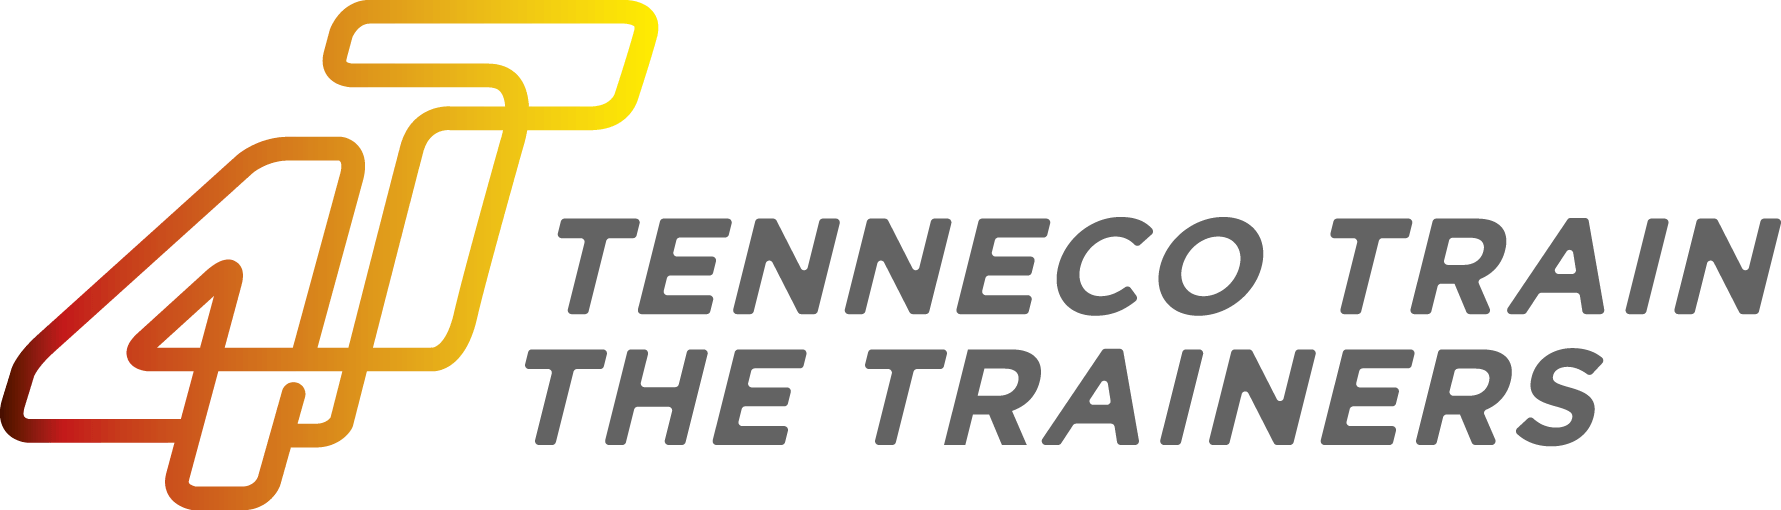 Tenneco Logo - Tenneco launches eLearning Platform for Distributors and Installers